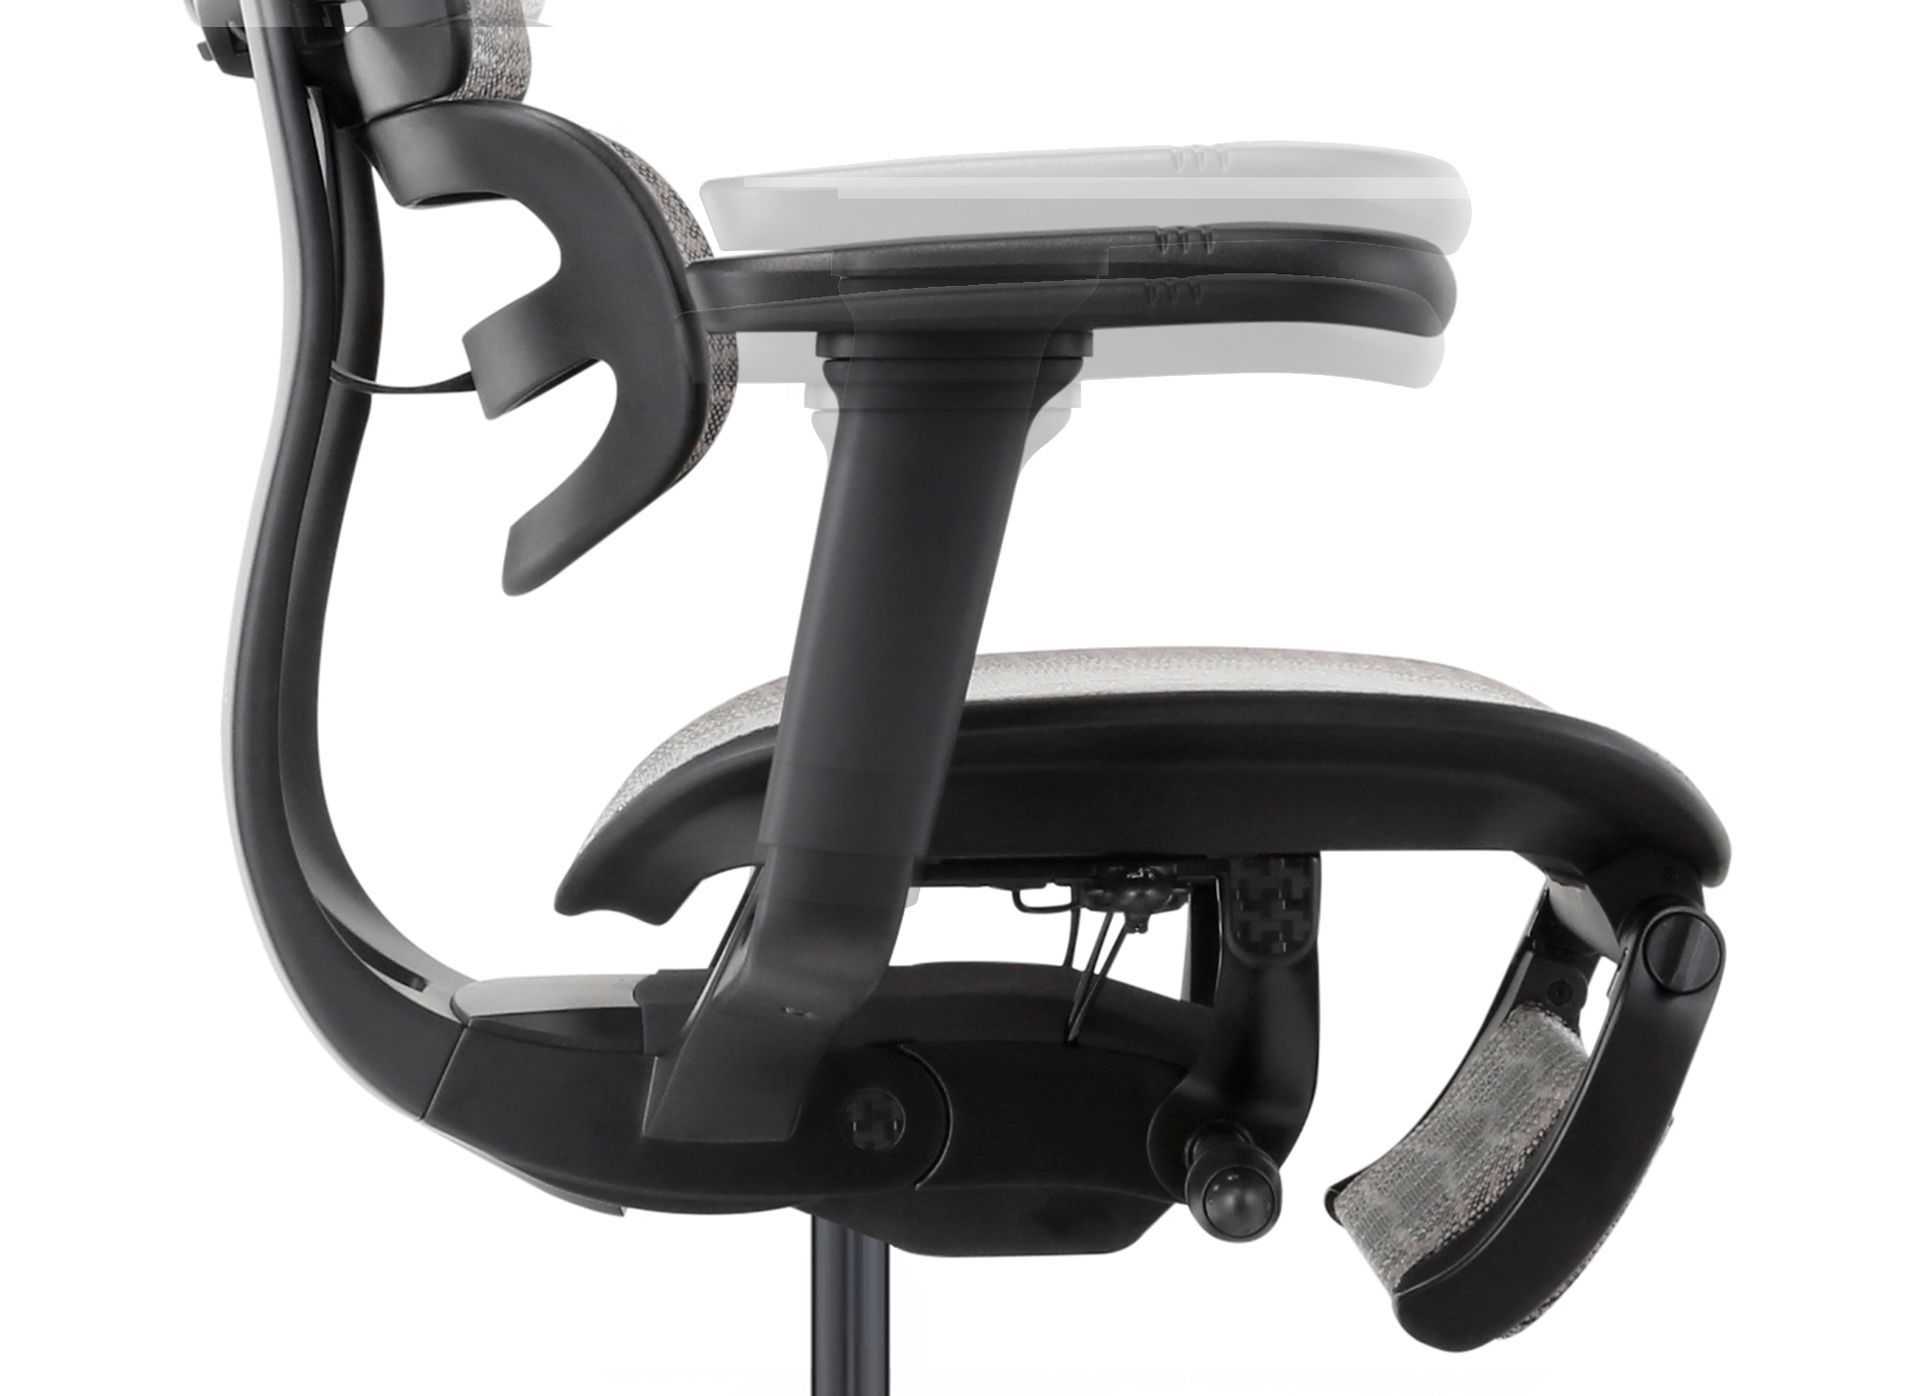 Profile view of the Ergohuman Carbon gaming chair armrest, showcasing height adjustment